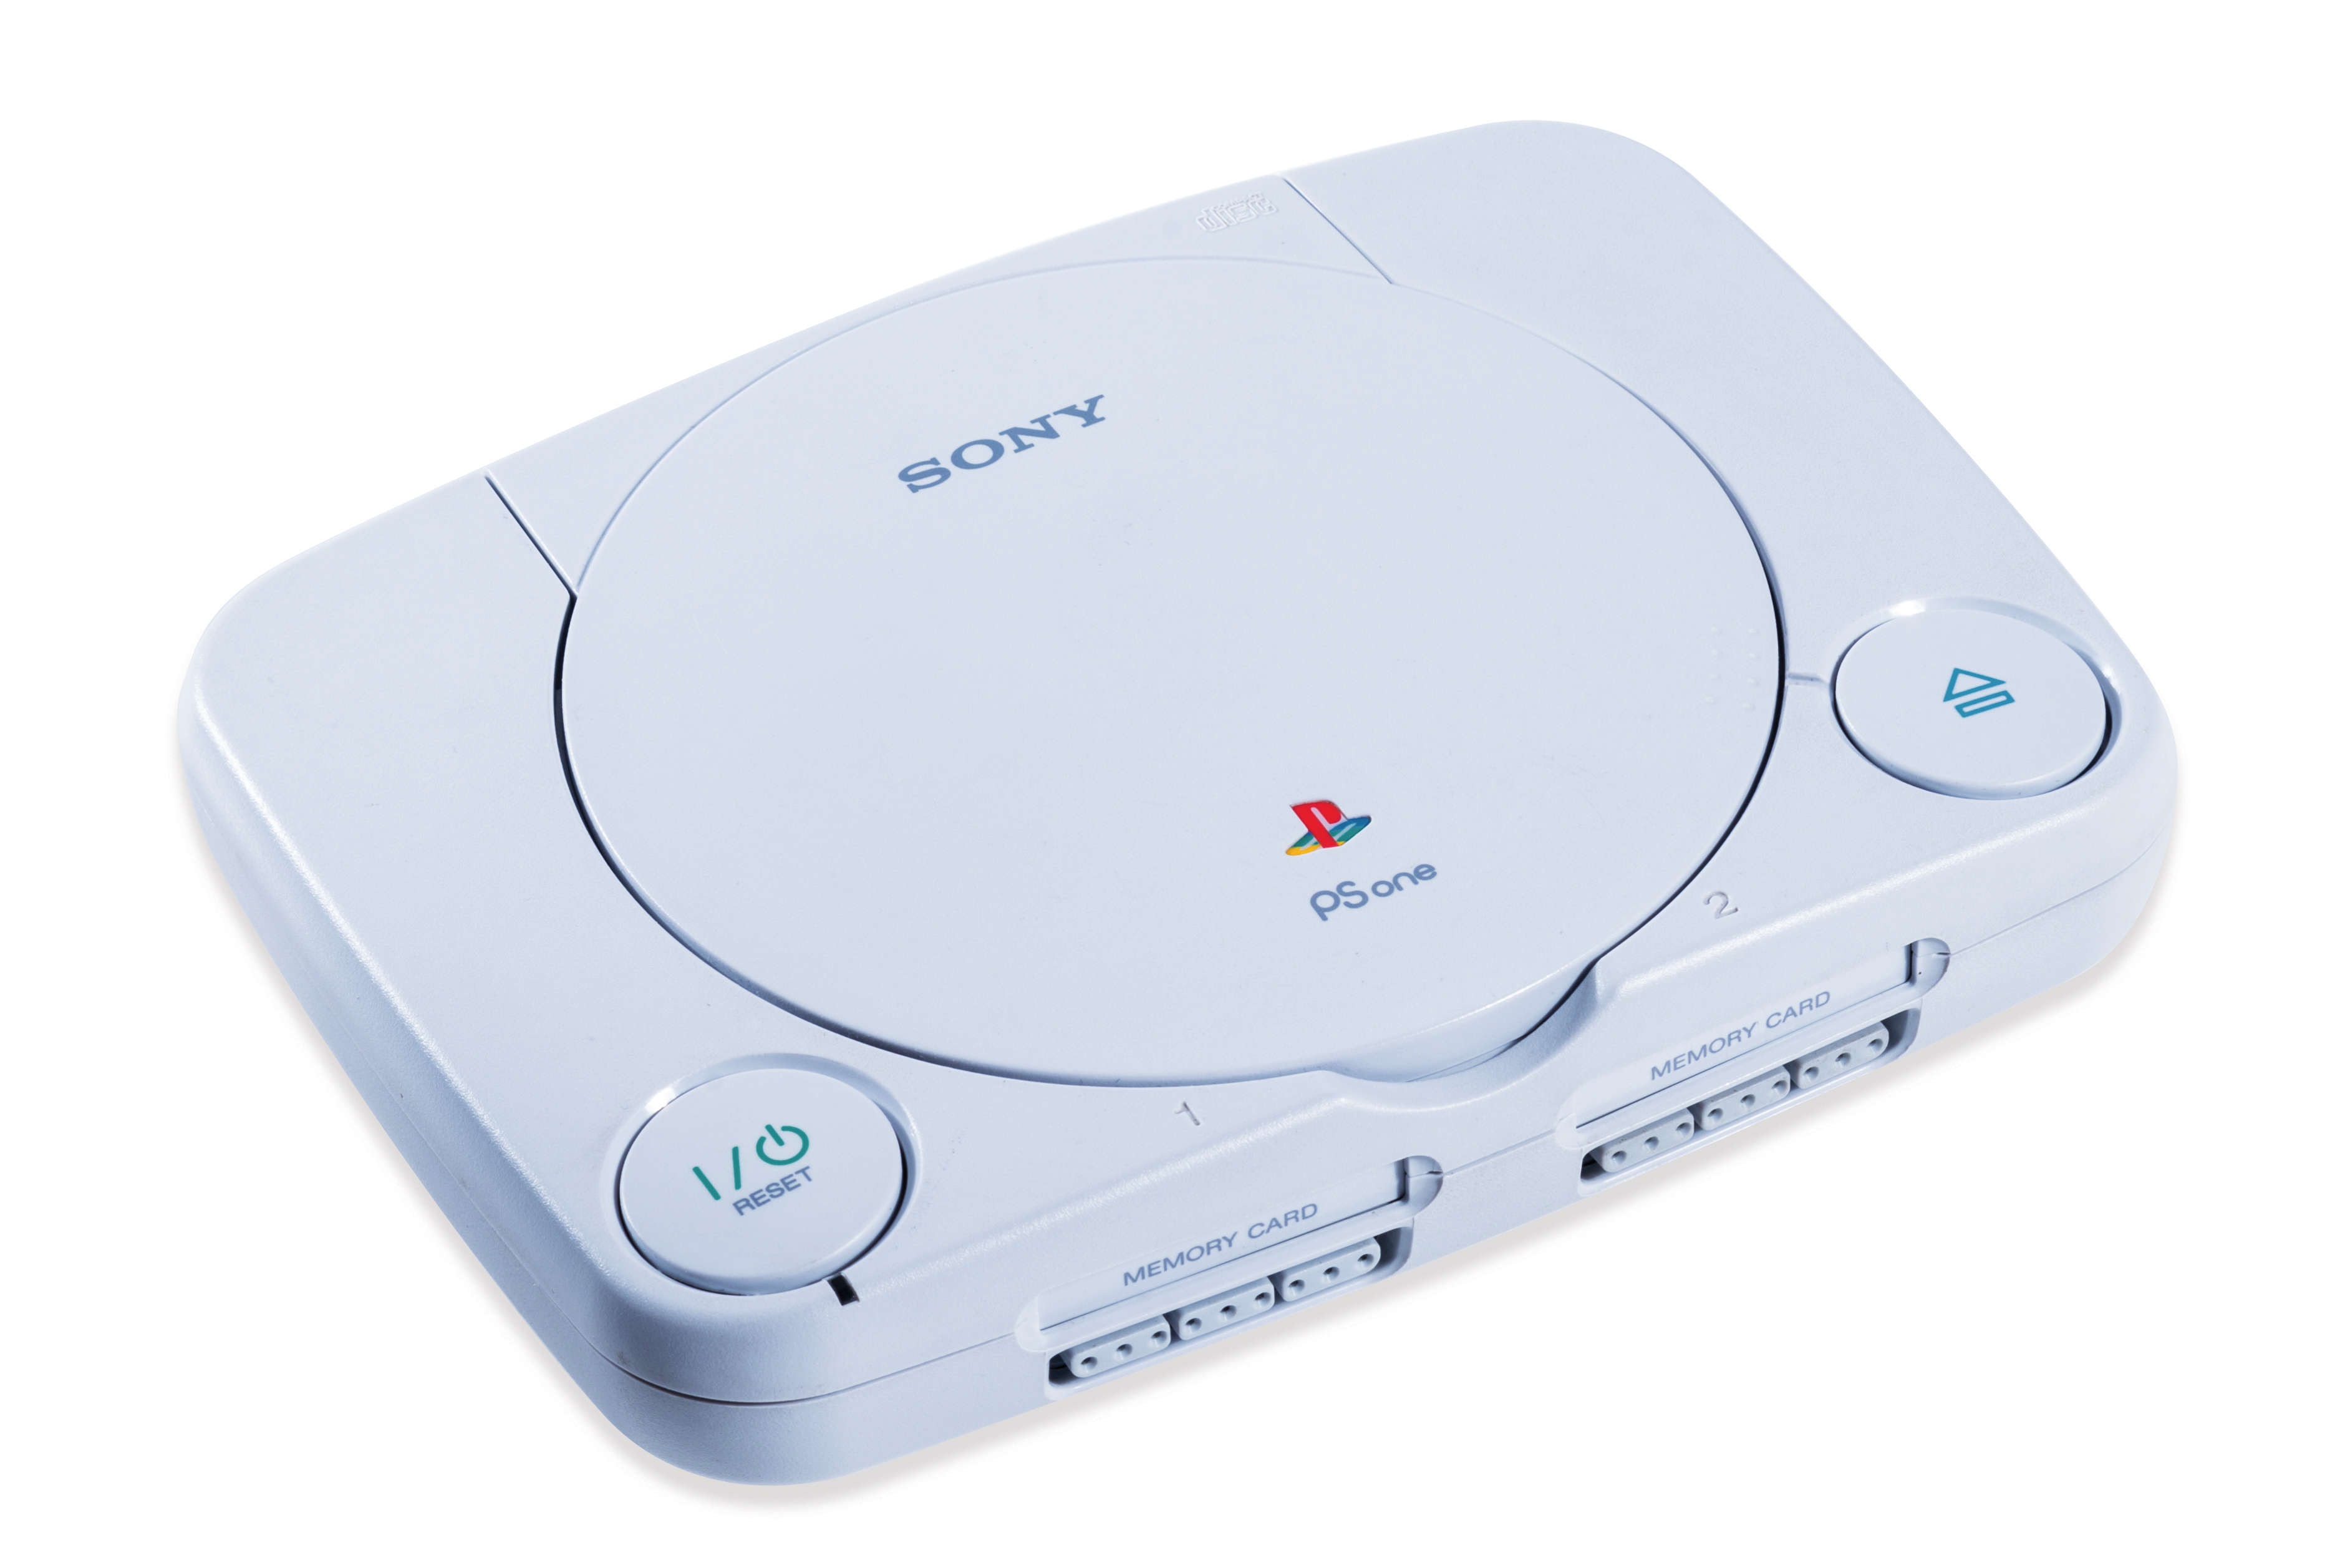 The original Sony PlayStation console